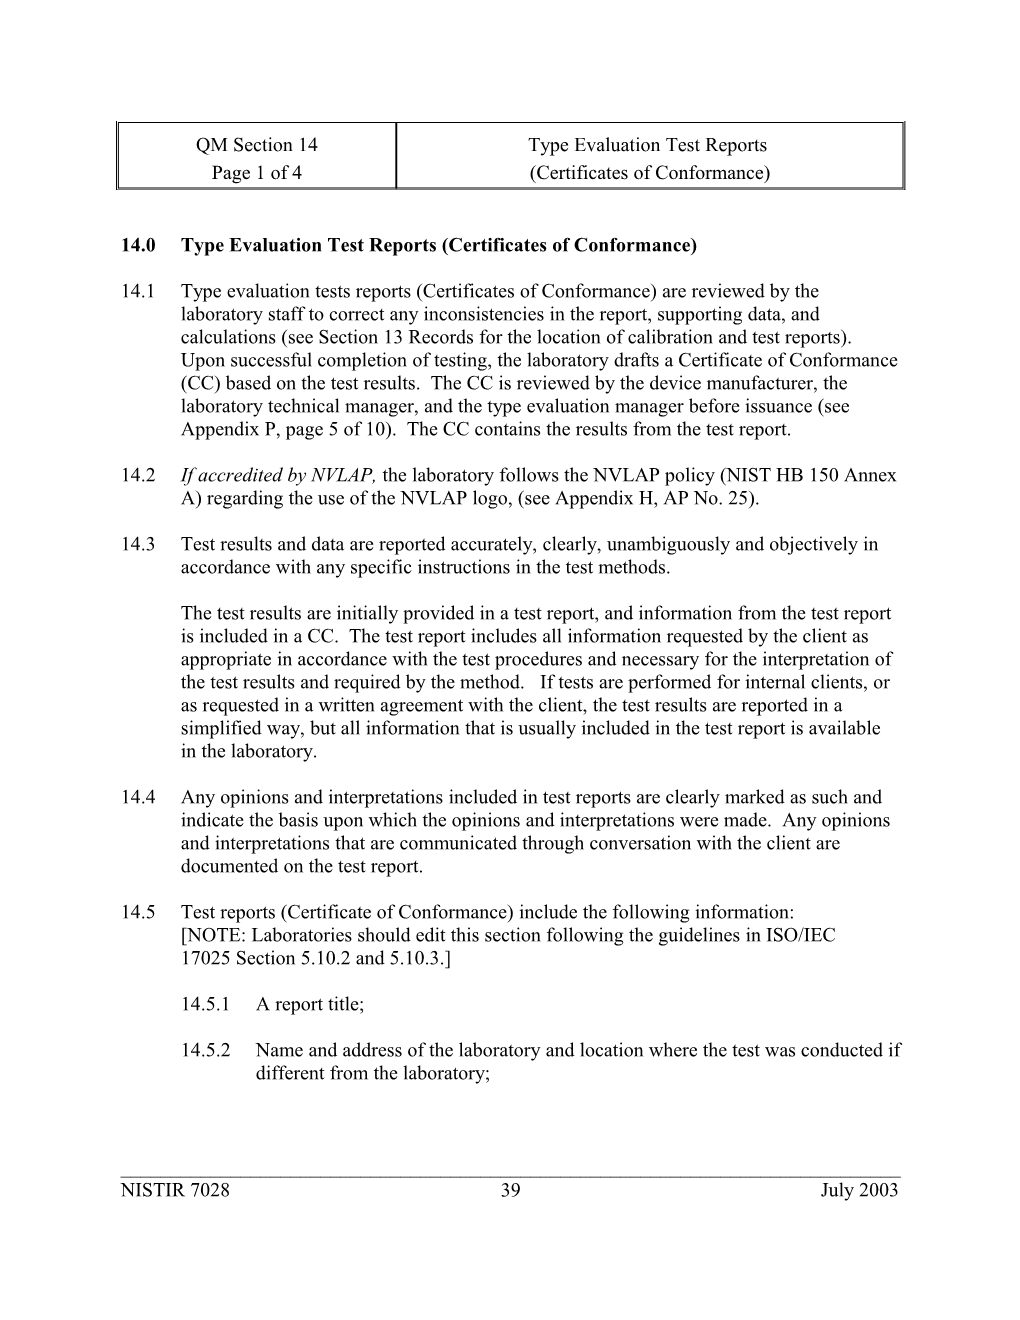 14.0Type Evaluation Test Reports (Certificates of Conformance)